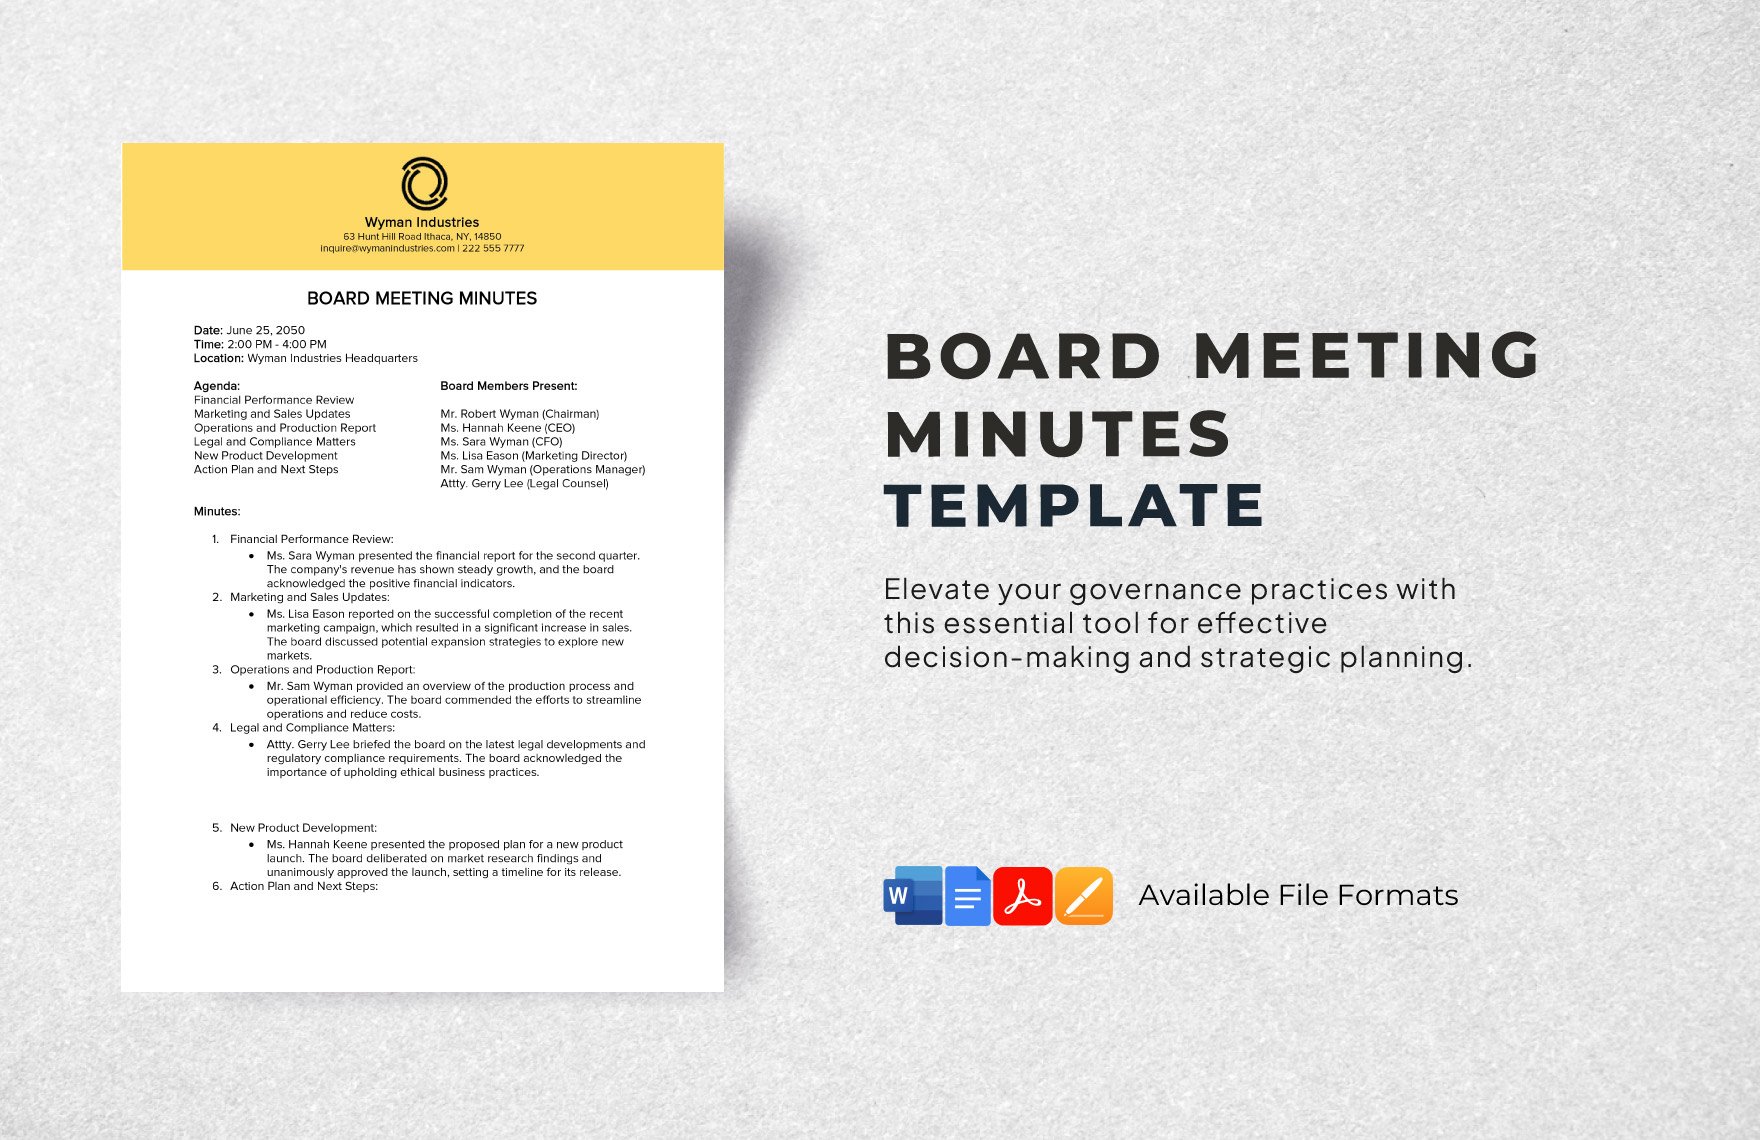 Board Meeting Minutes Template in Word, Google Docs, PDF, Apple Pages